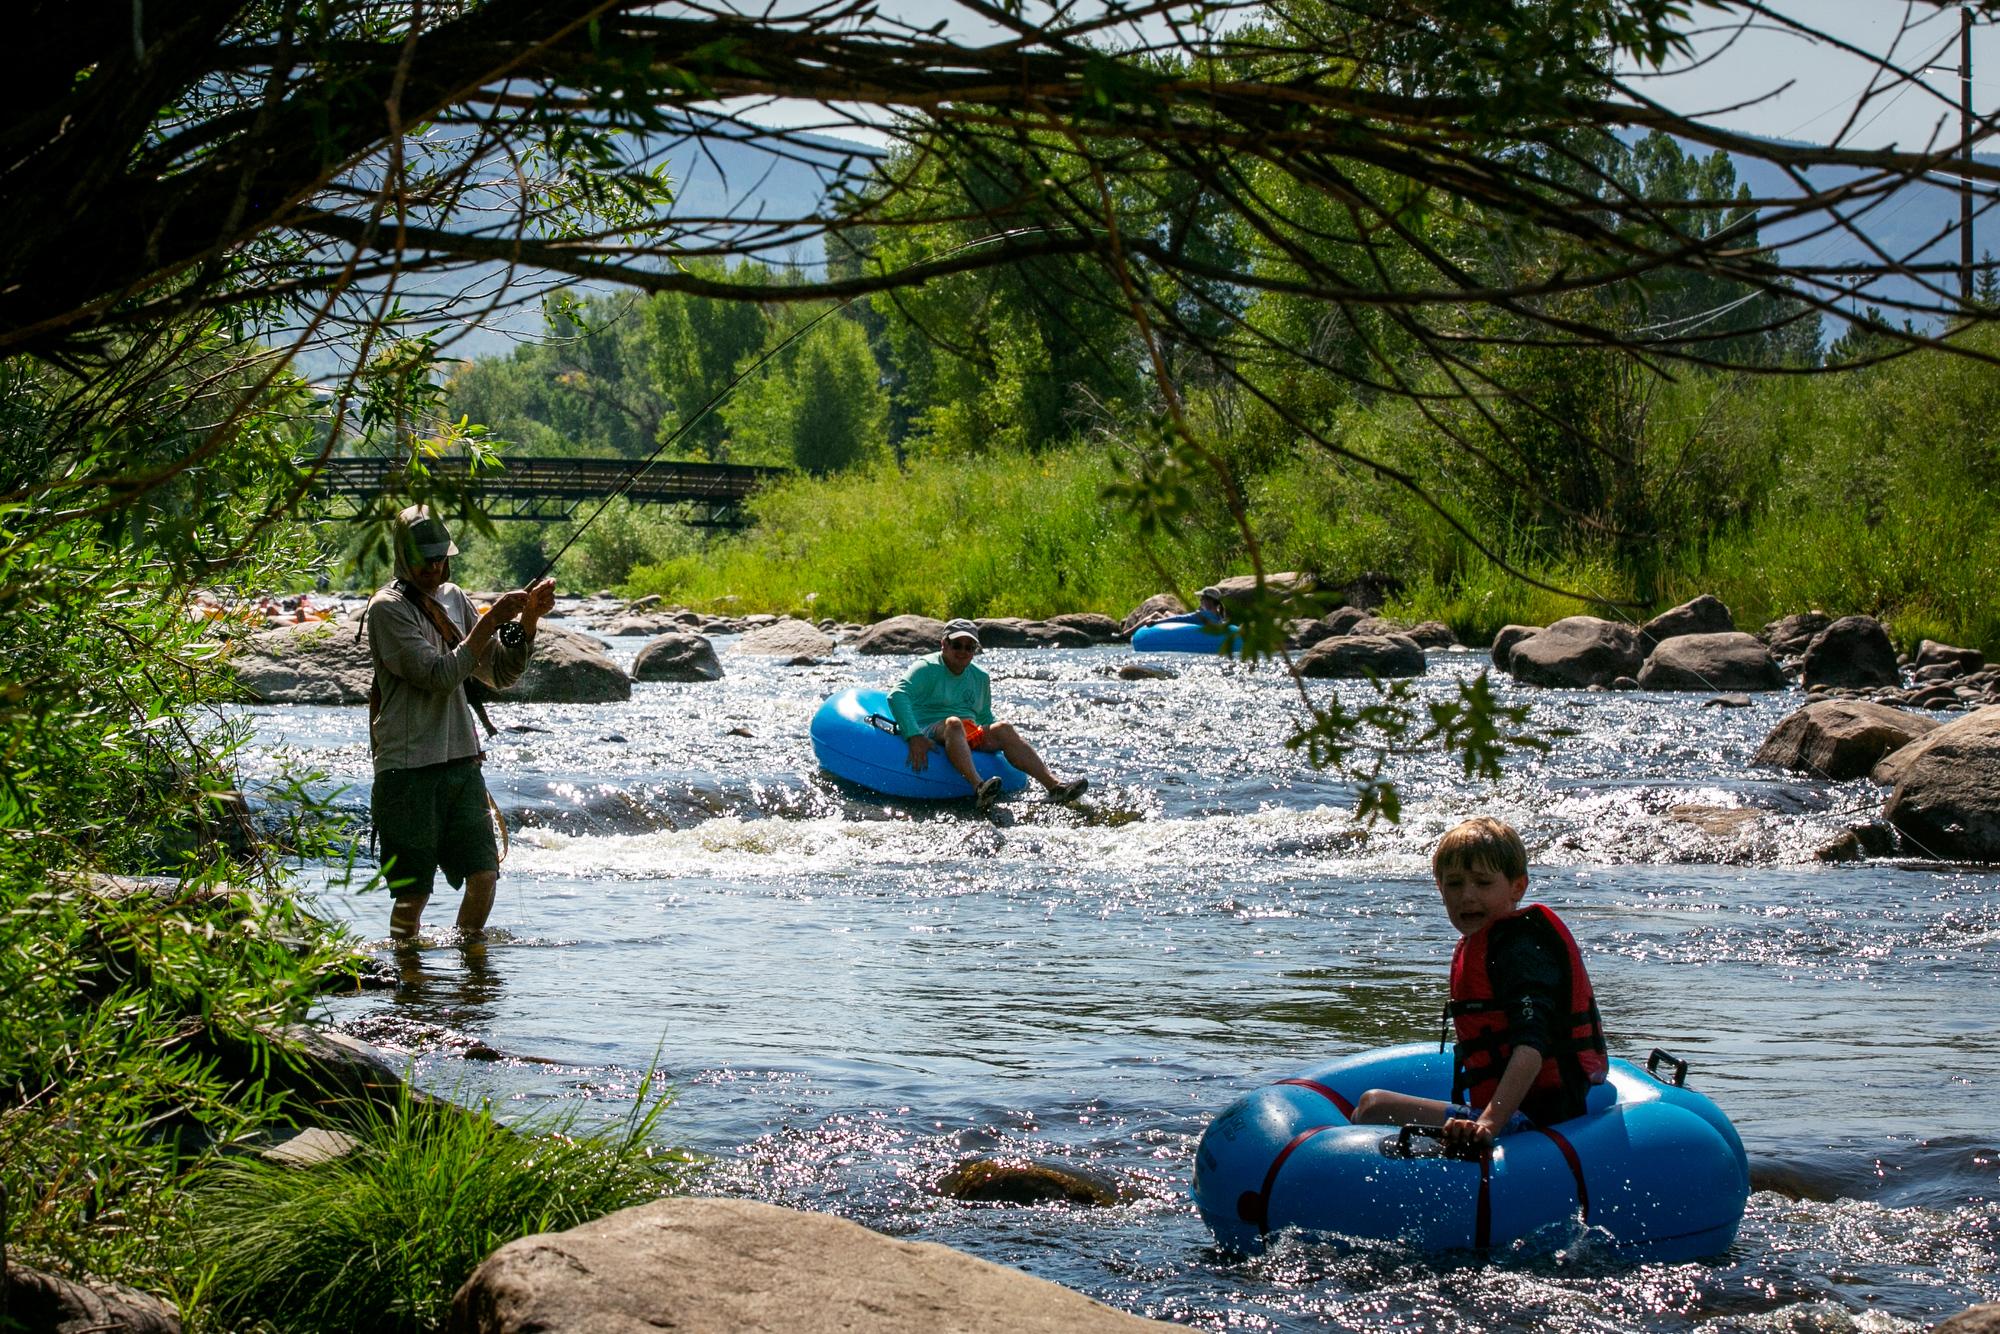 STEAMBOAT SPRINGS YAMPA RIVER SUMMER TOURISM